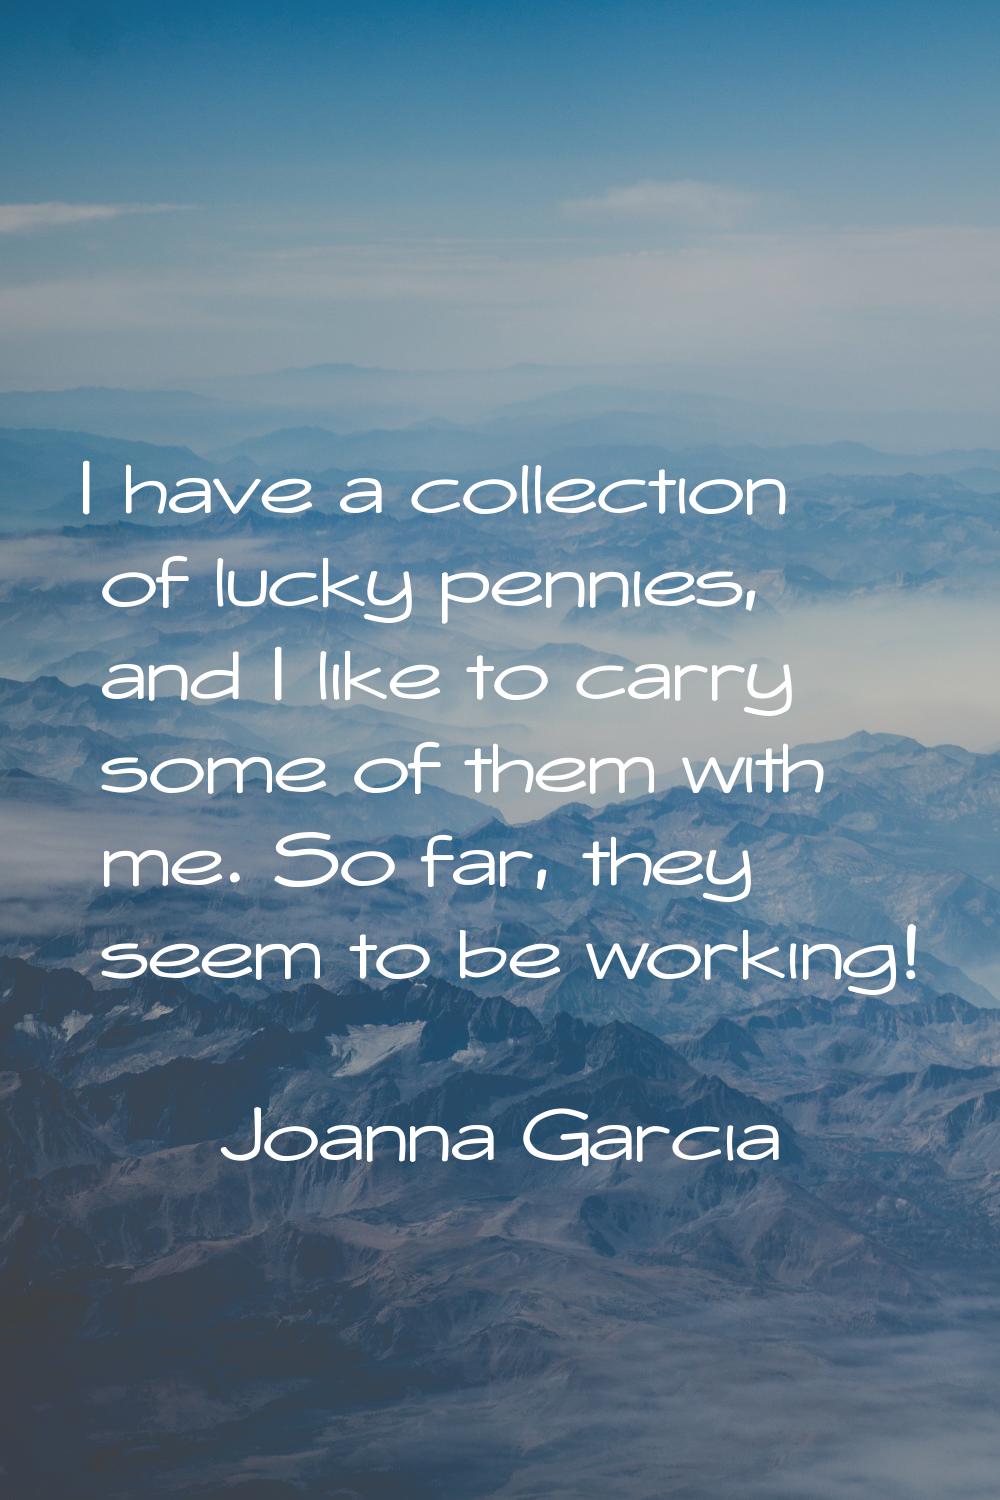 I have a collection of lucky pennies, and I like to carry some of them with me. So far, they seem t